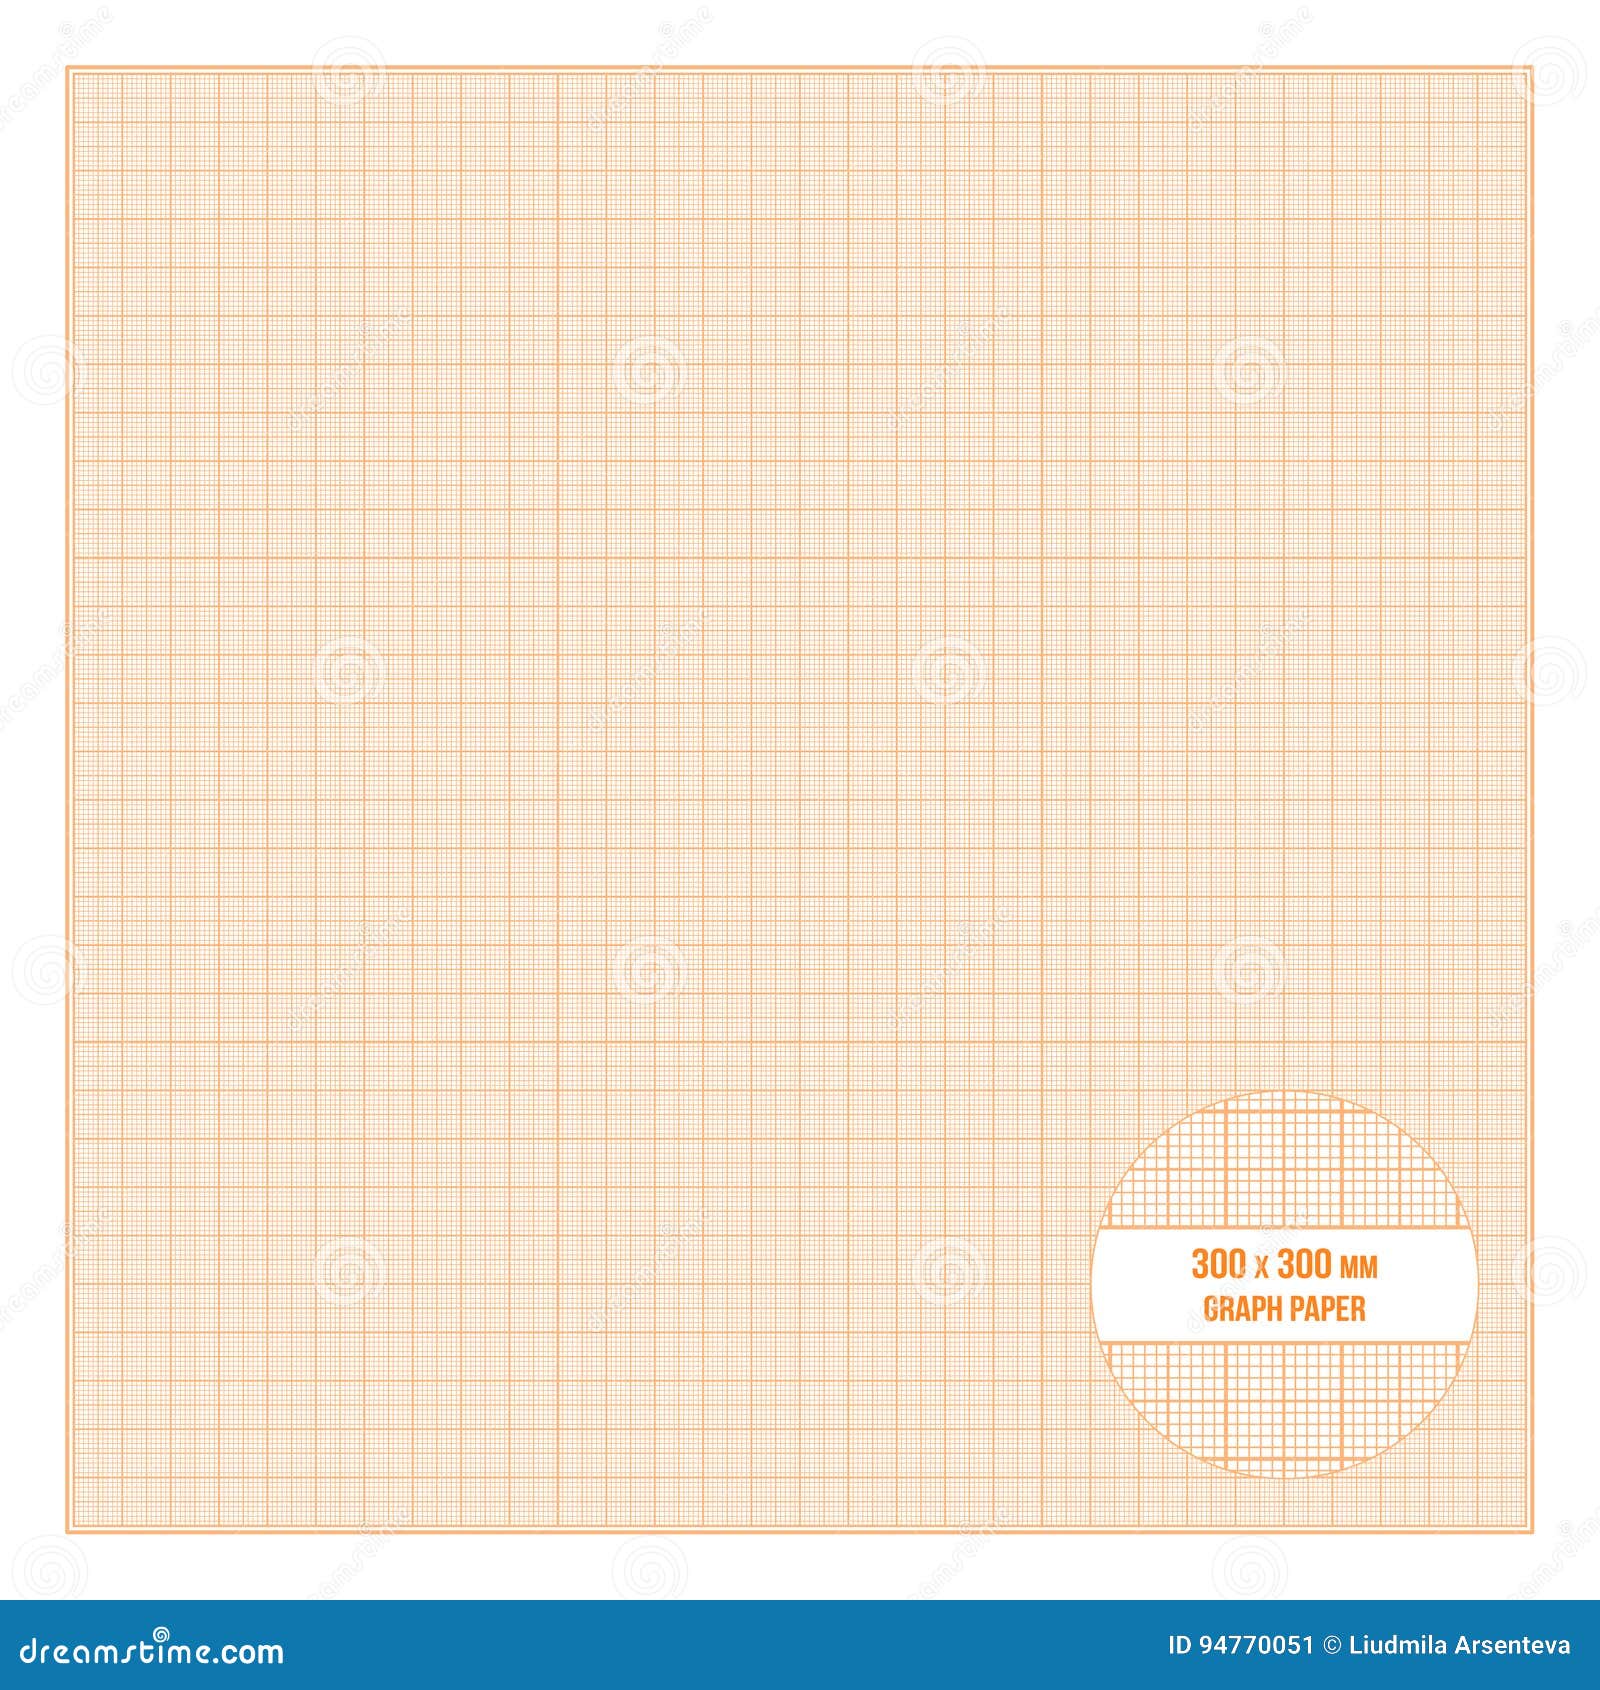 https://thumbs.dreamstime.com/z/vector-printable-metric-graph-paper-cm-size-orange-mm-grid-accented-every-centimeter-94770051.jpg